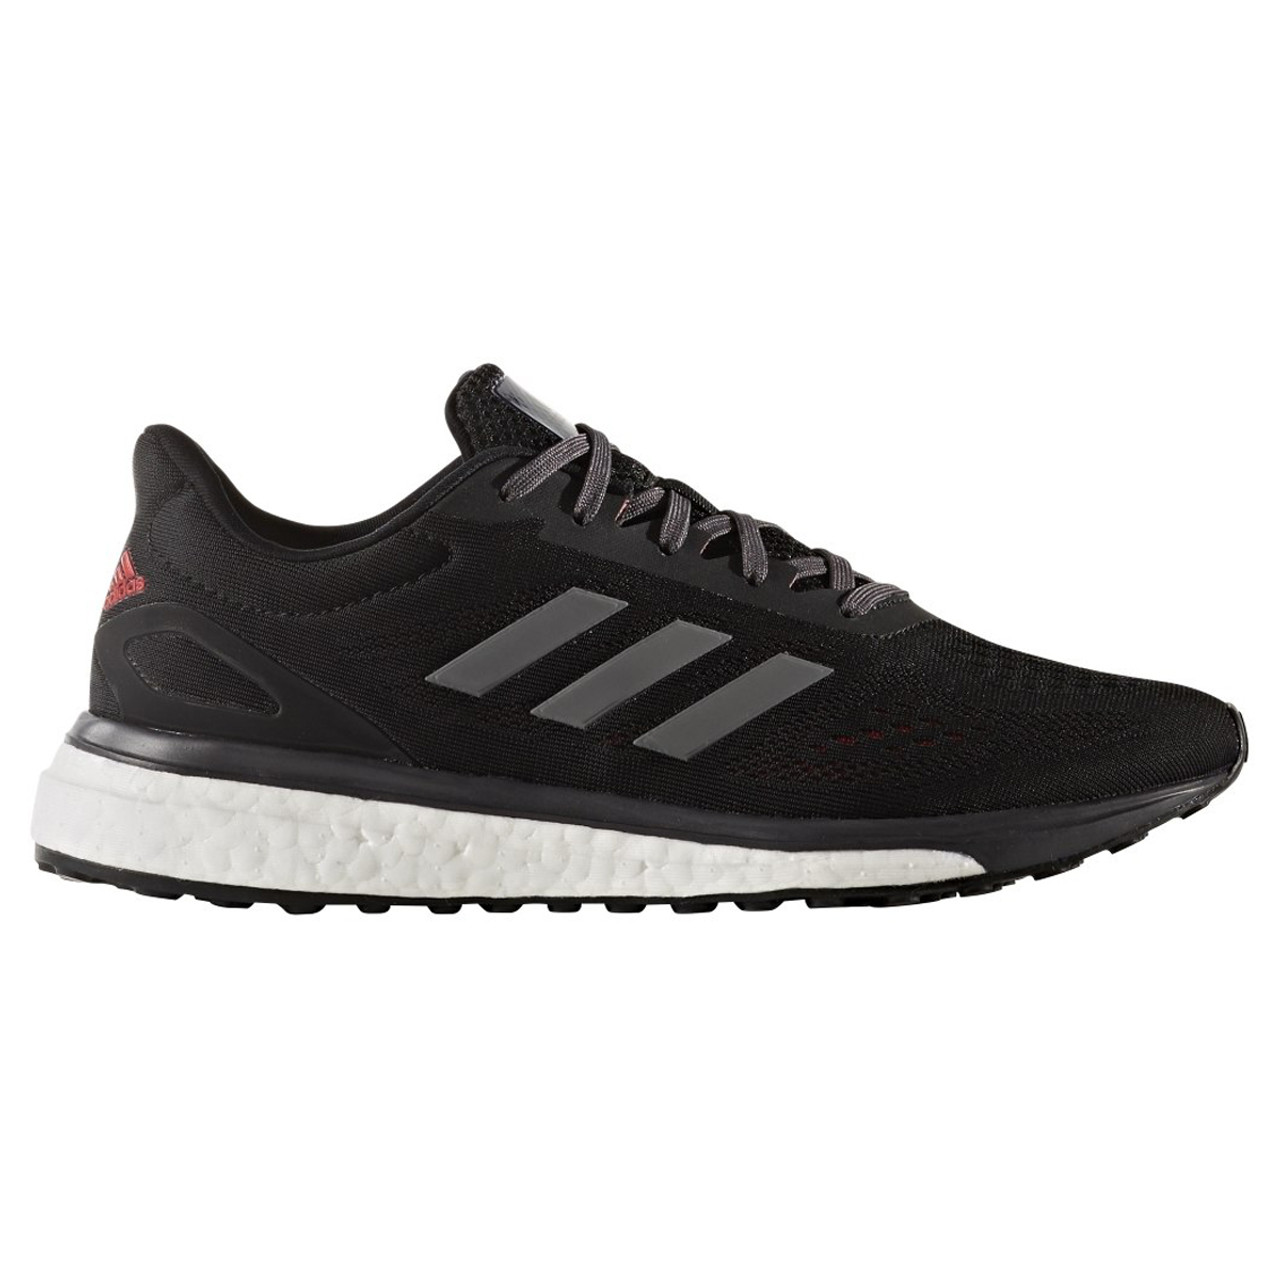 adidas lady sonic boost running shoes